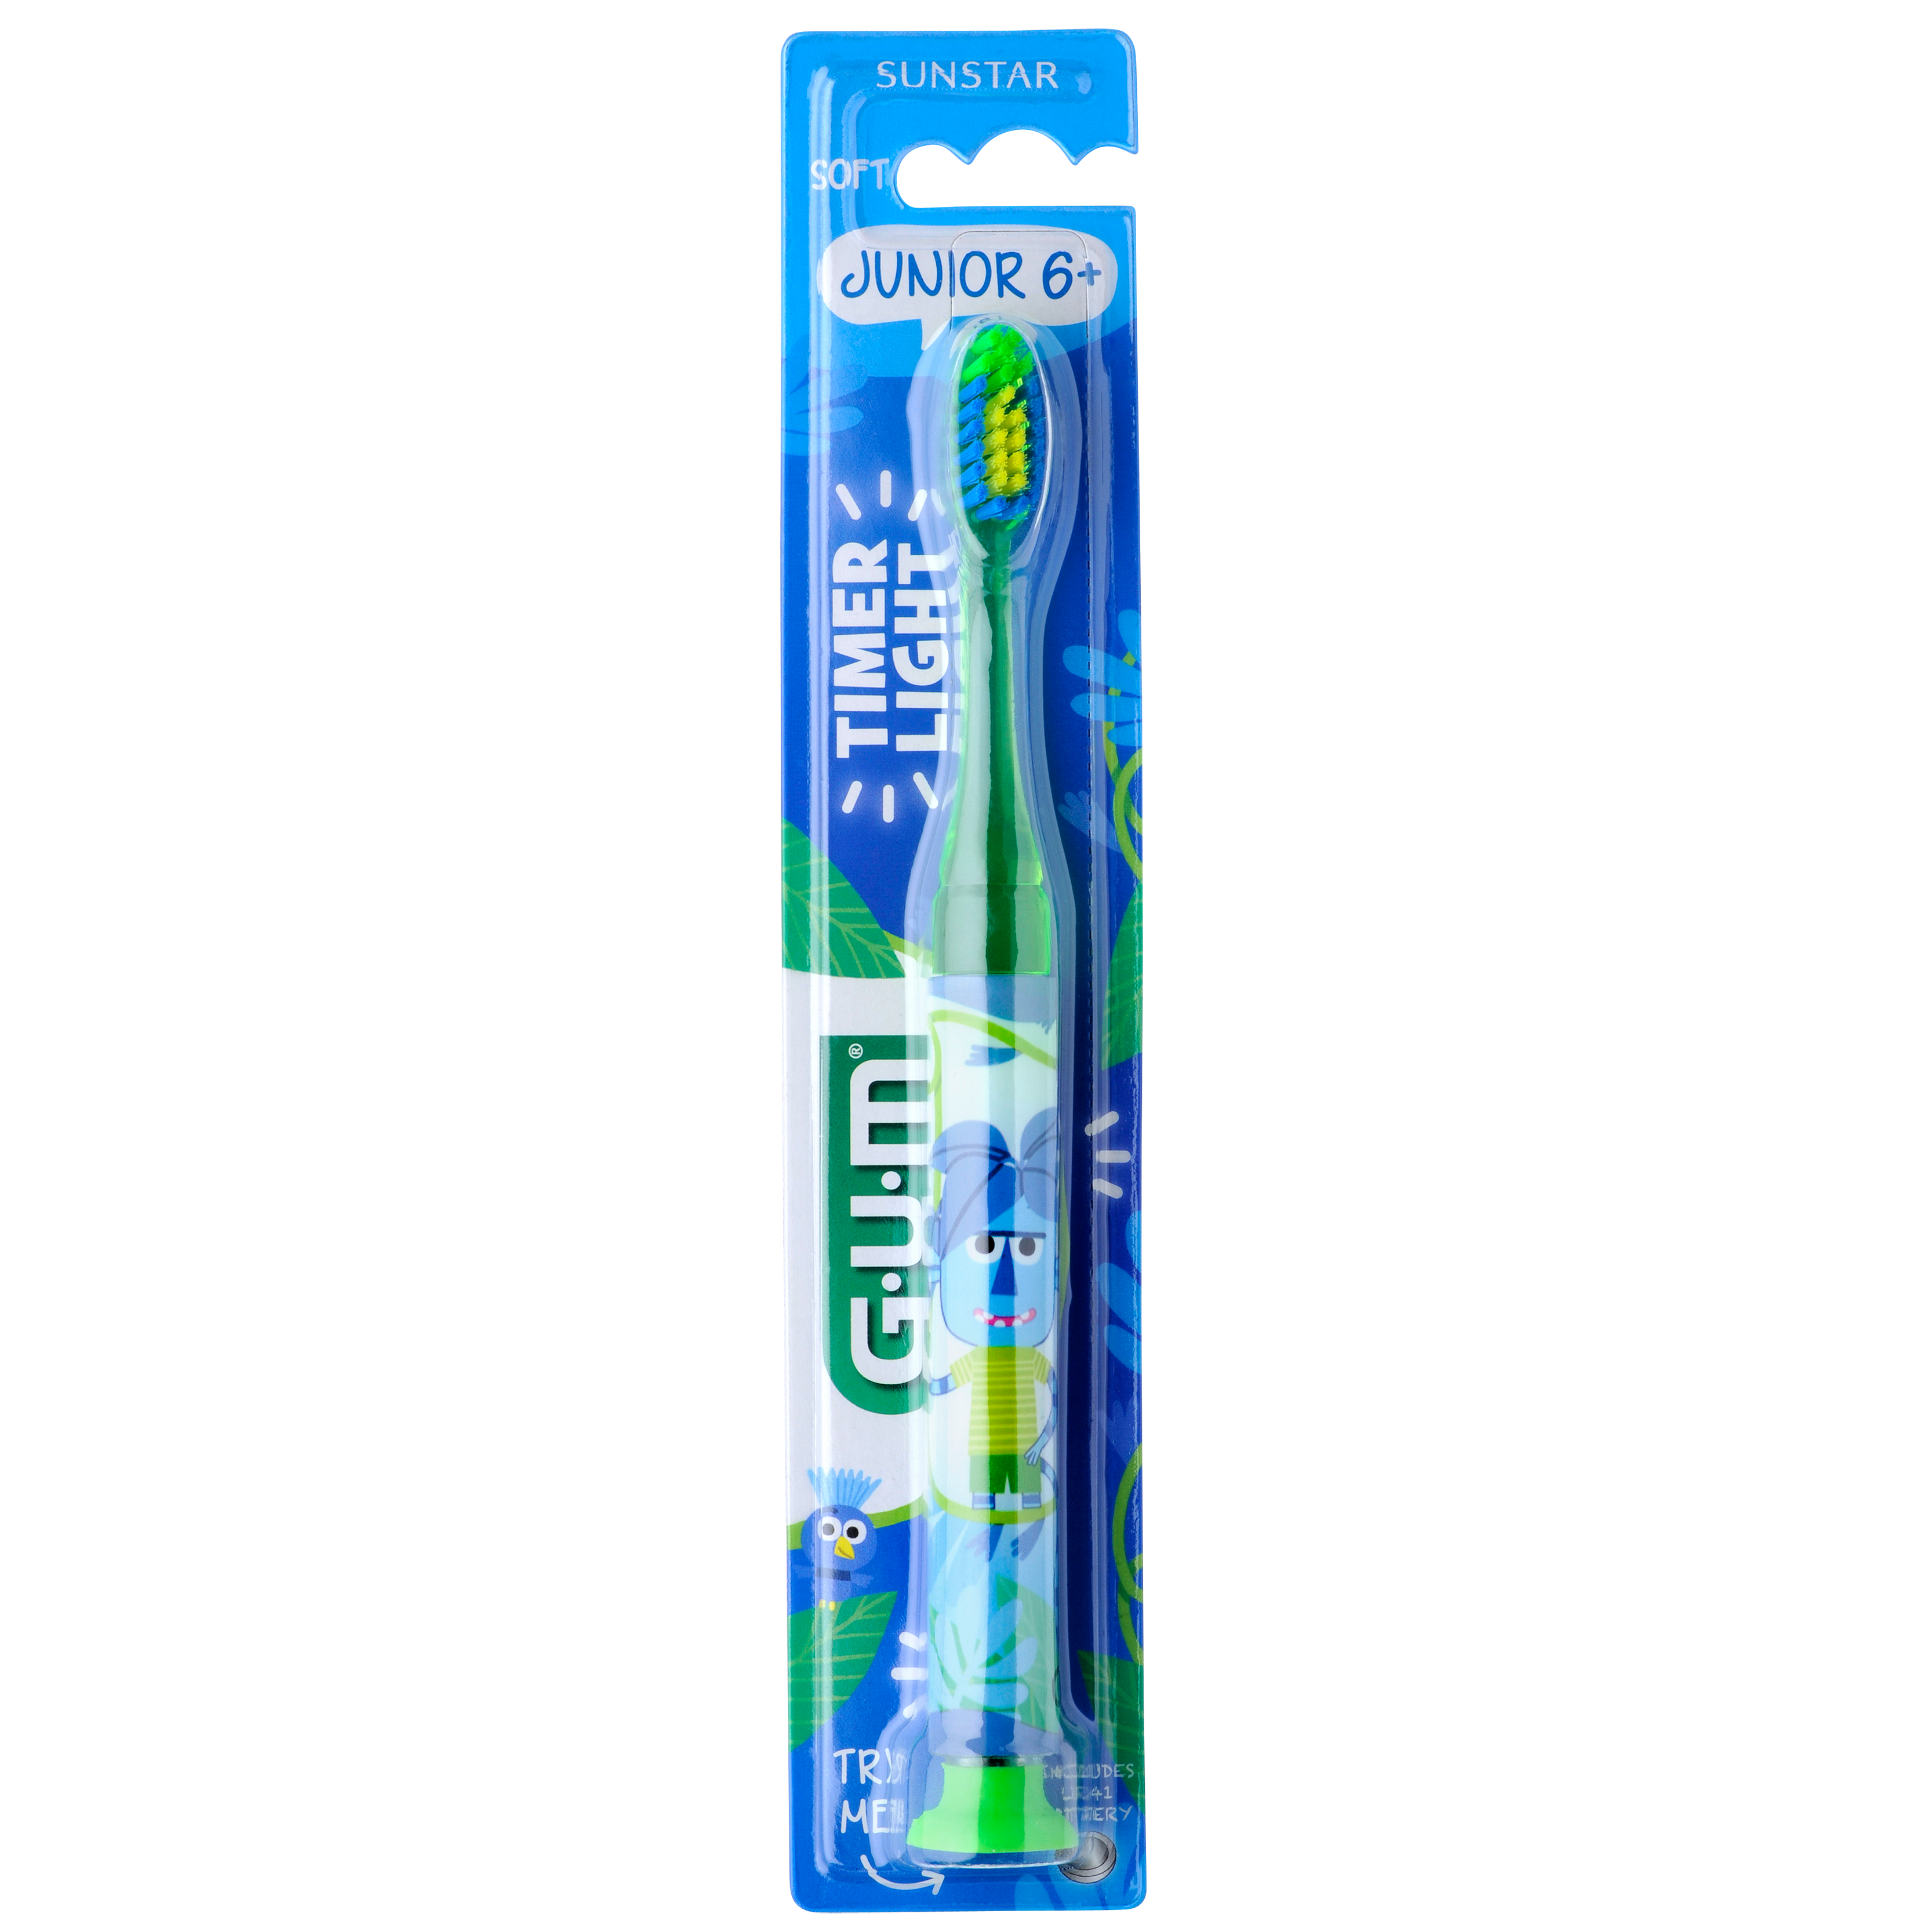 P903-GUM-Junior-Light-Up-Toothbrush-Green-Blister-Front.png